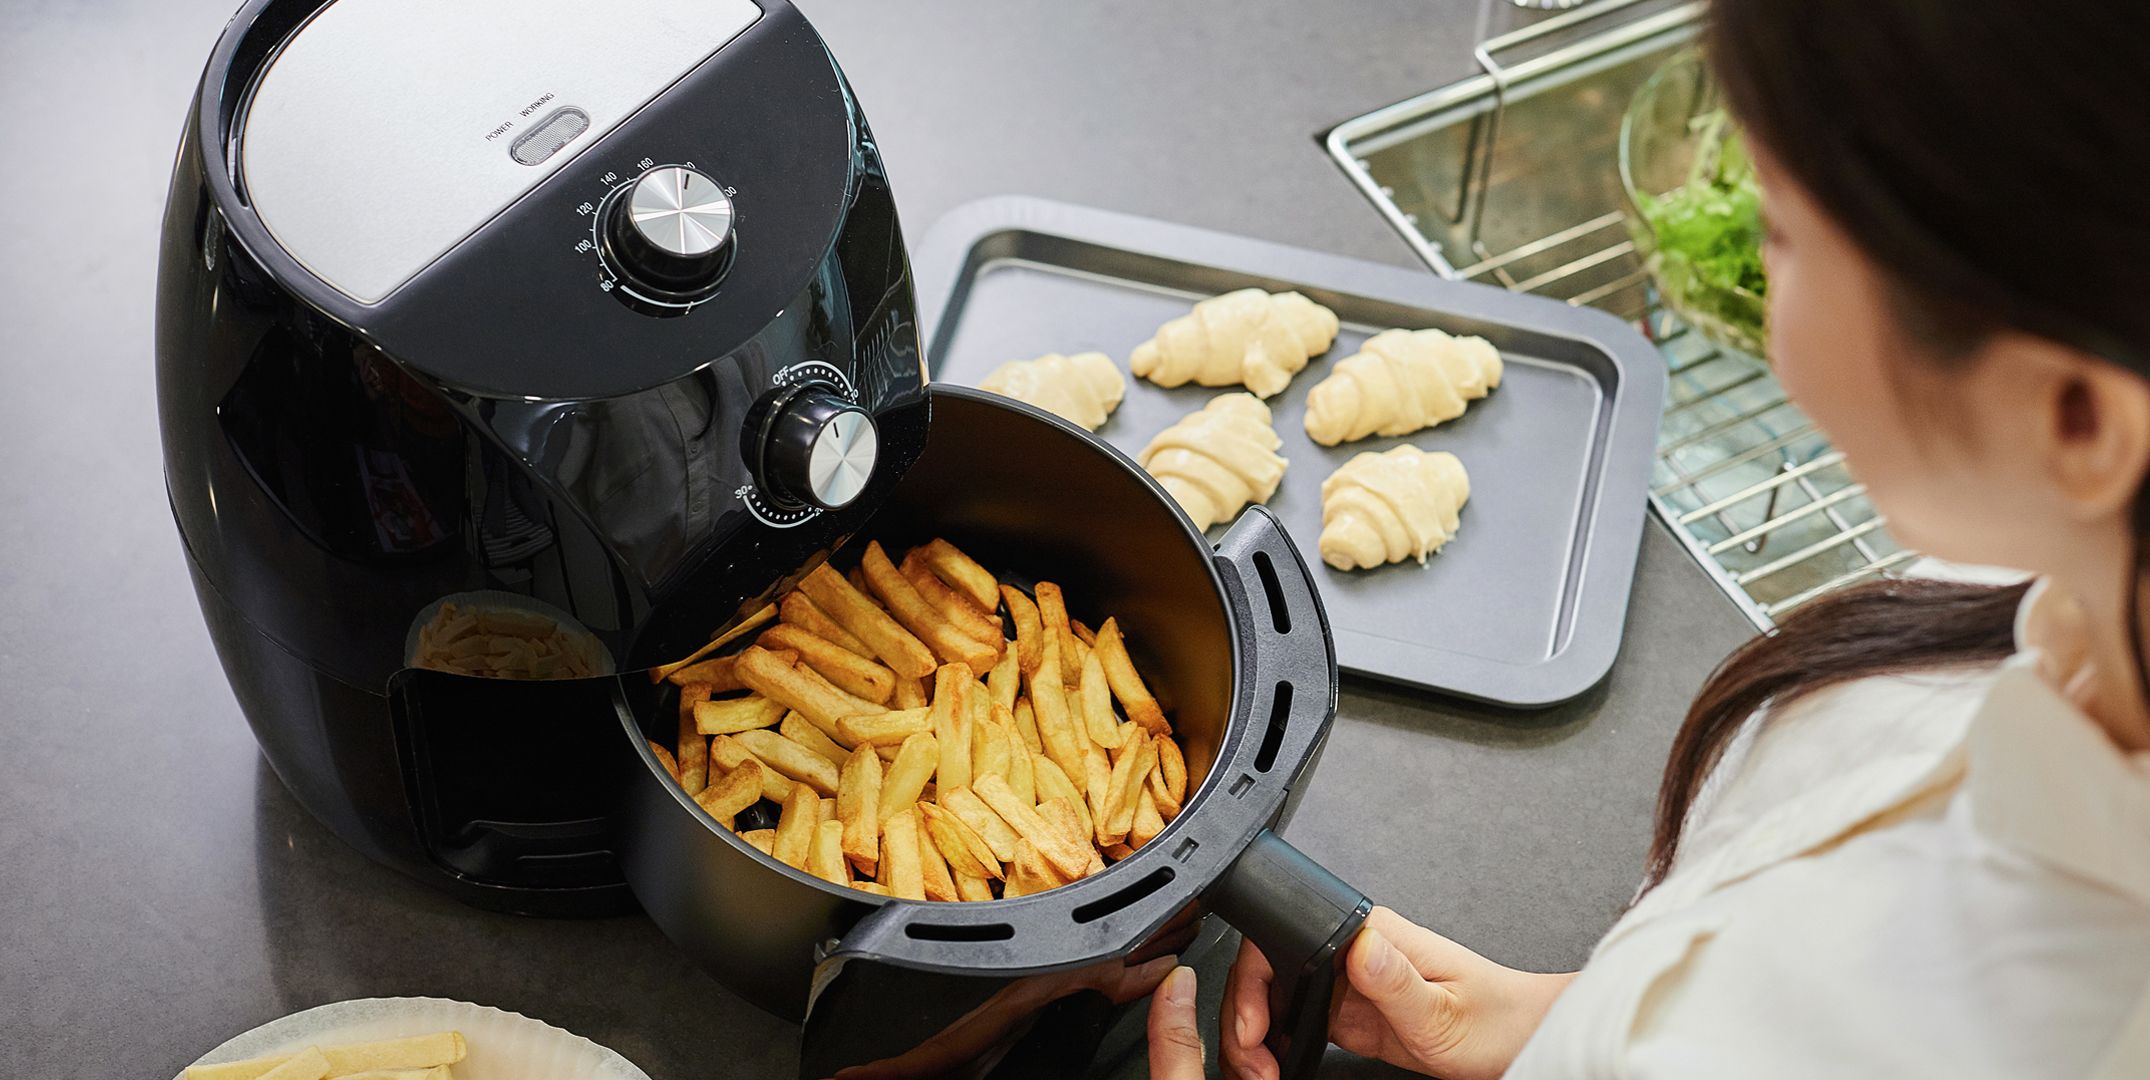 How to clean an air fryer in 6 easy steps